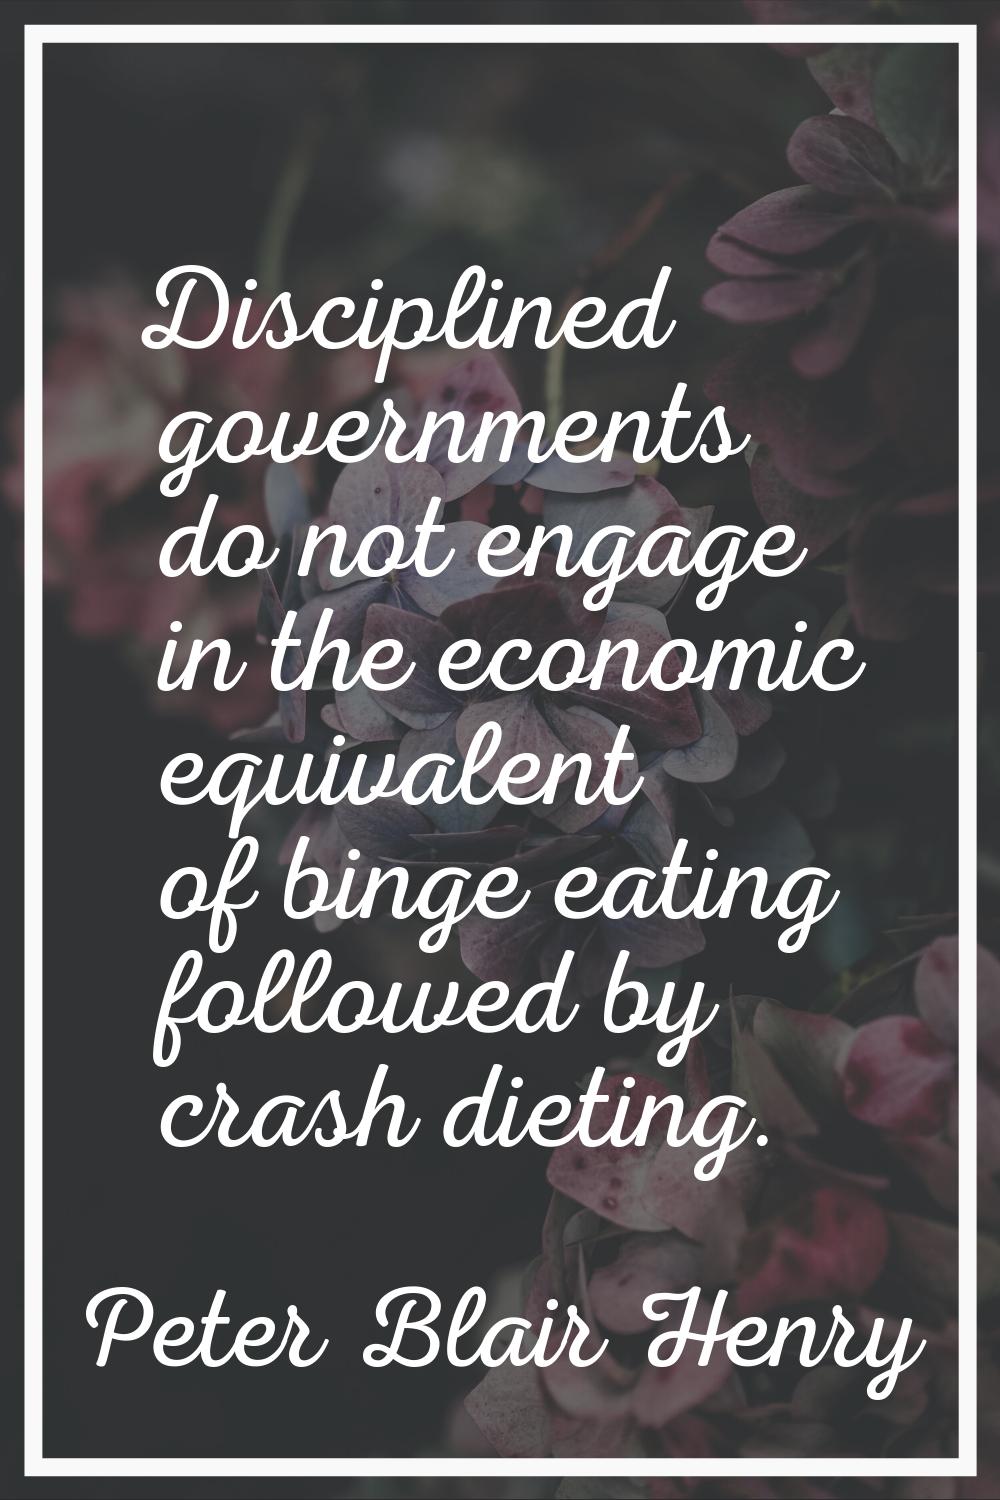 Disciplined governments do not engage in the economic equivalent of binge eating followed by crash 